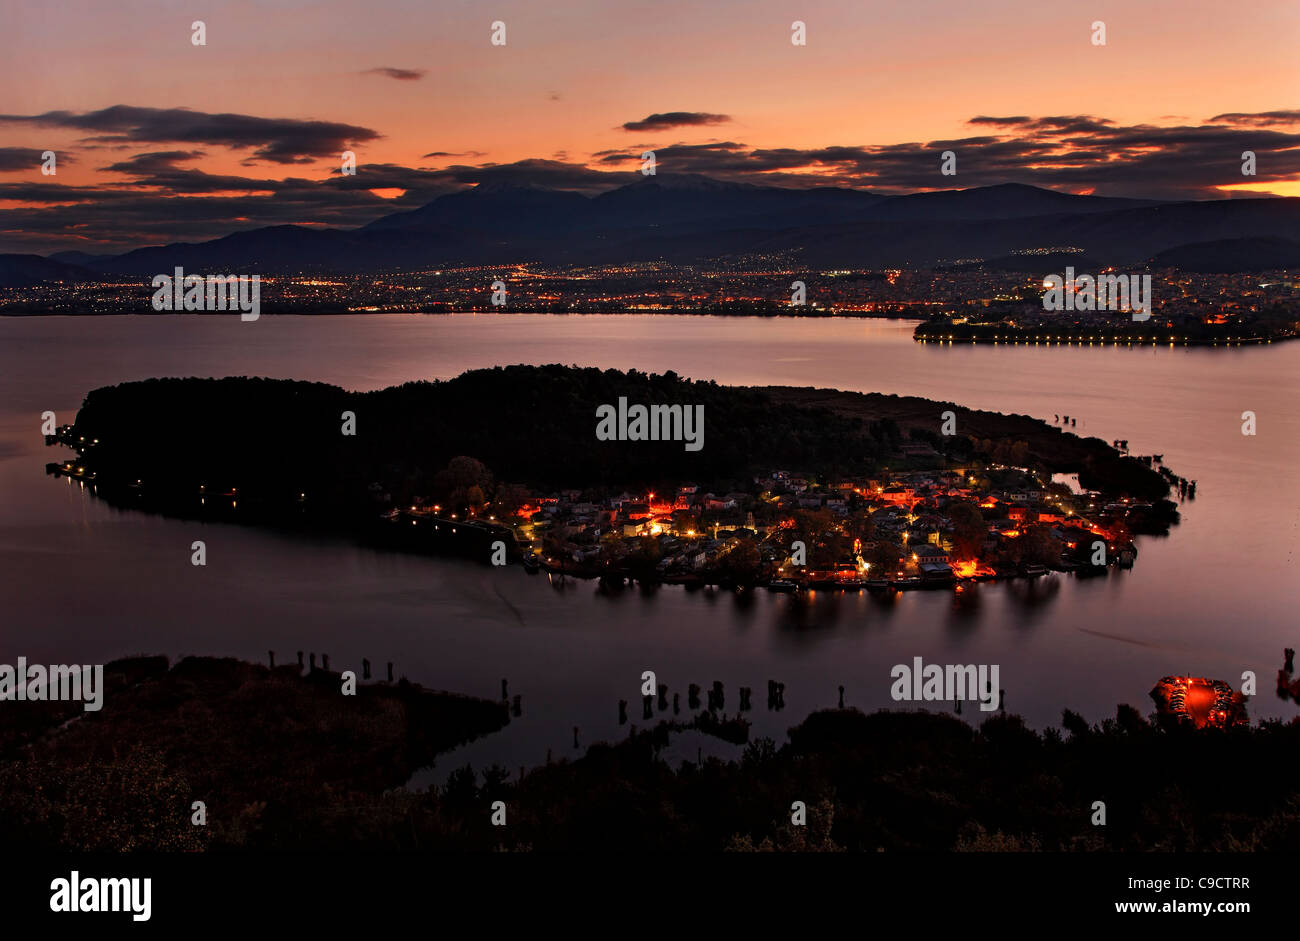 Panoramic sunset  view of Ioannina town, its lake ("Pamvotis" or "Pamvotida"), the islet of the lake and its village. Greece Stock Photo